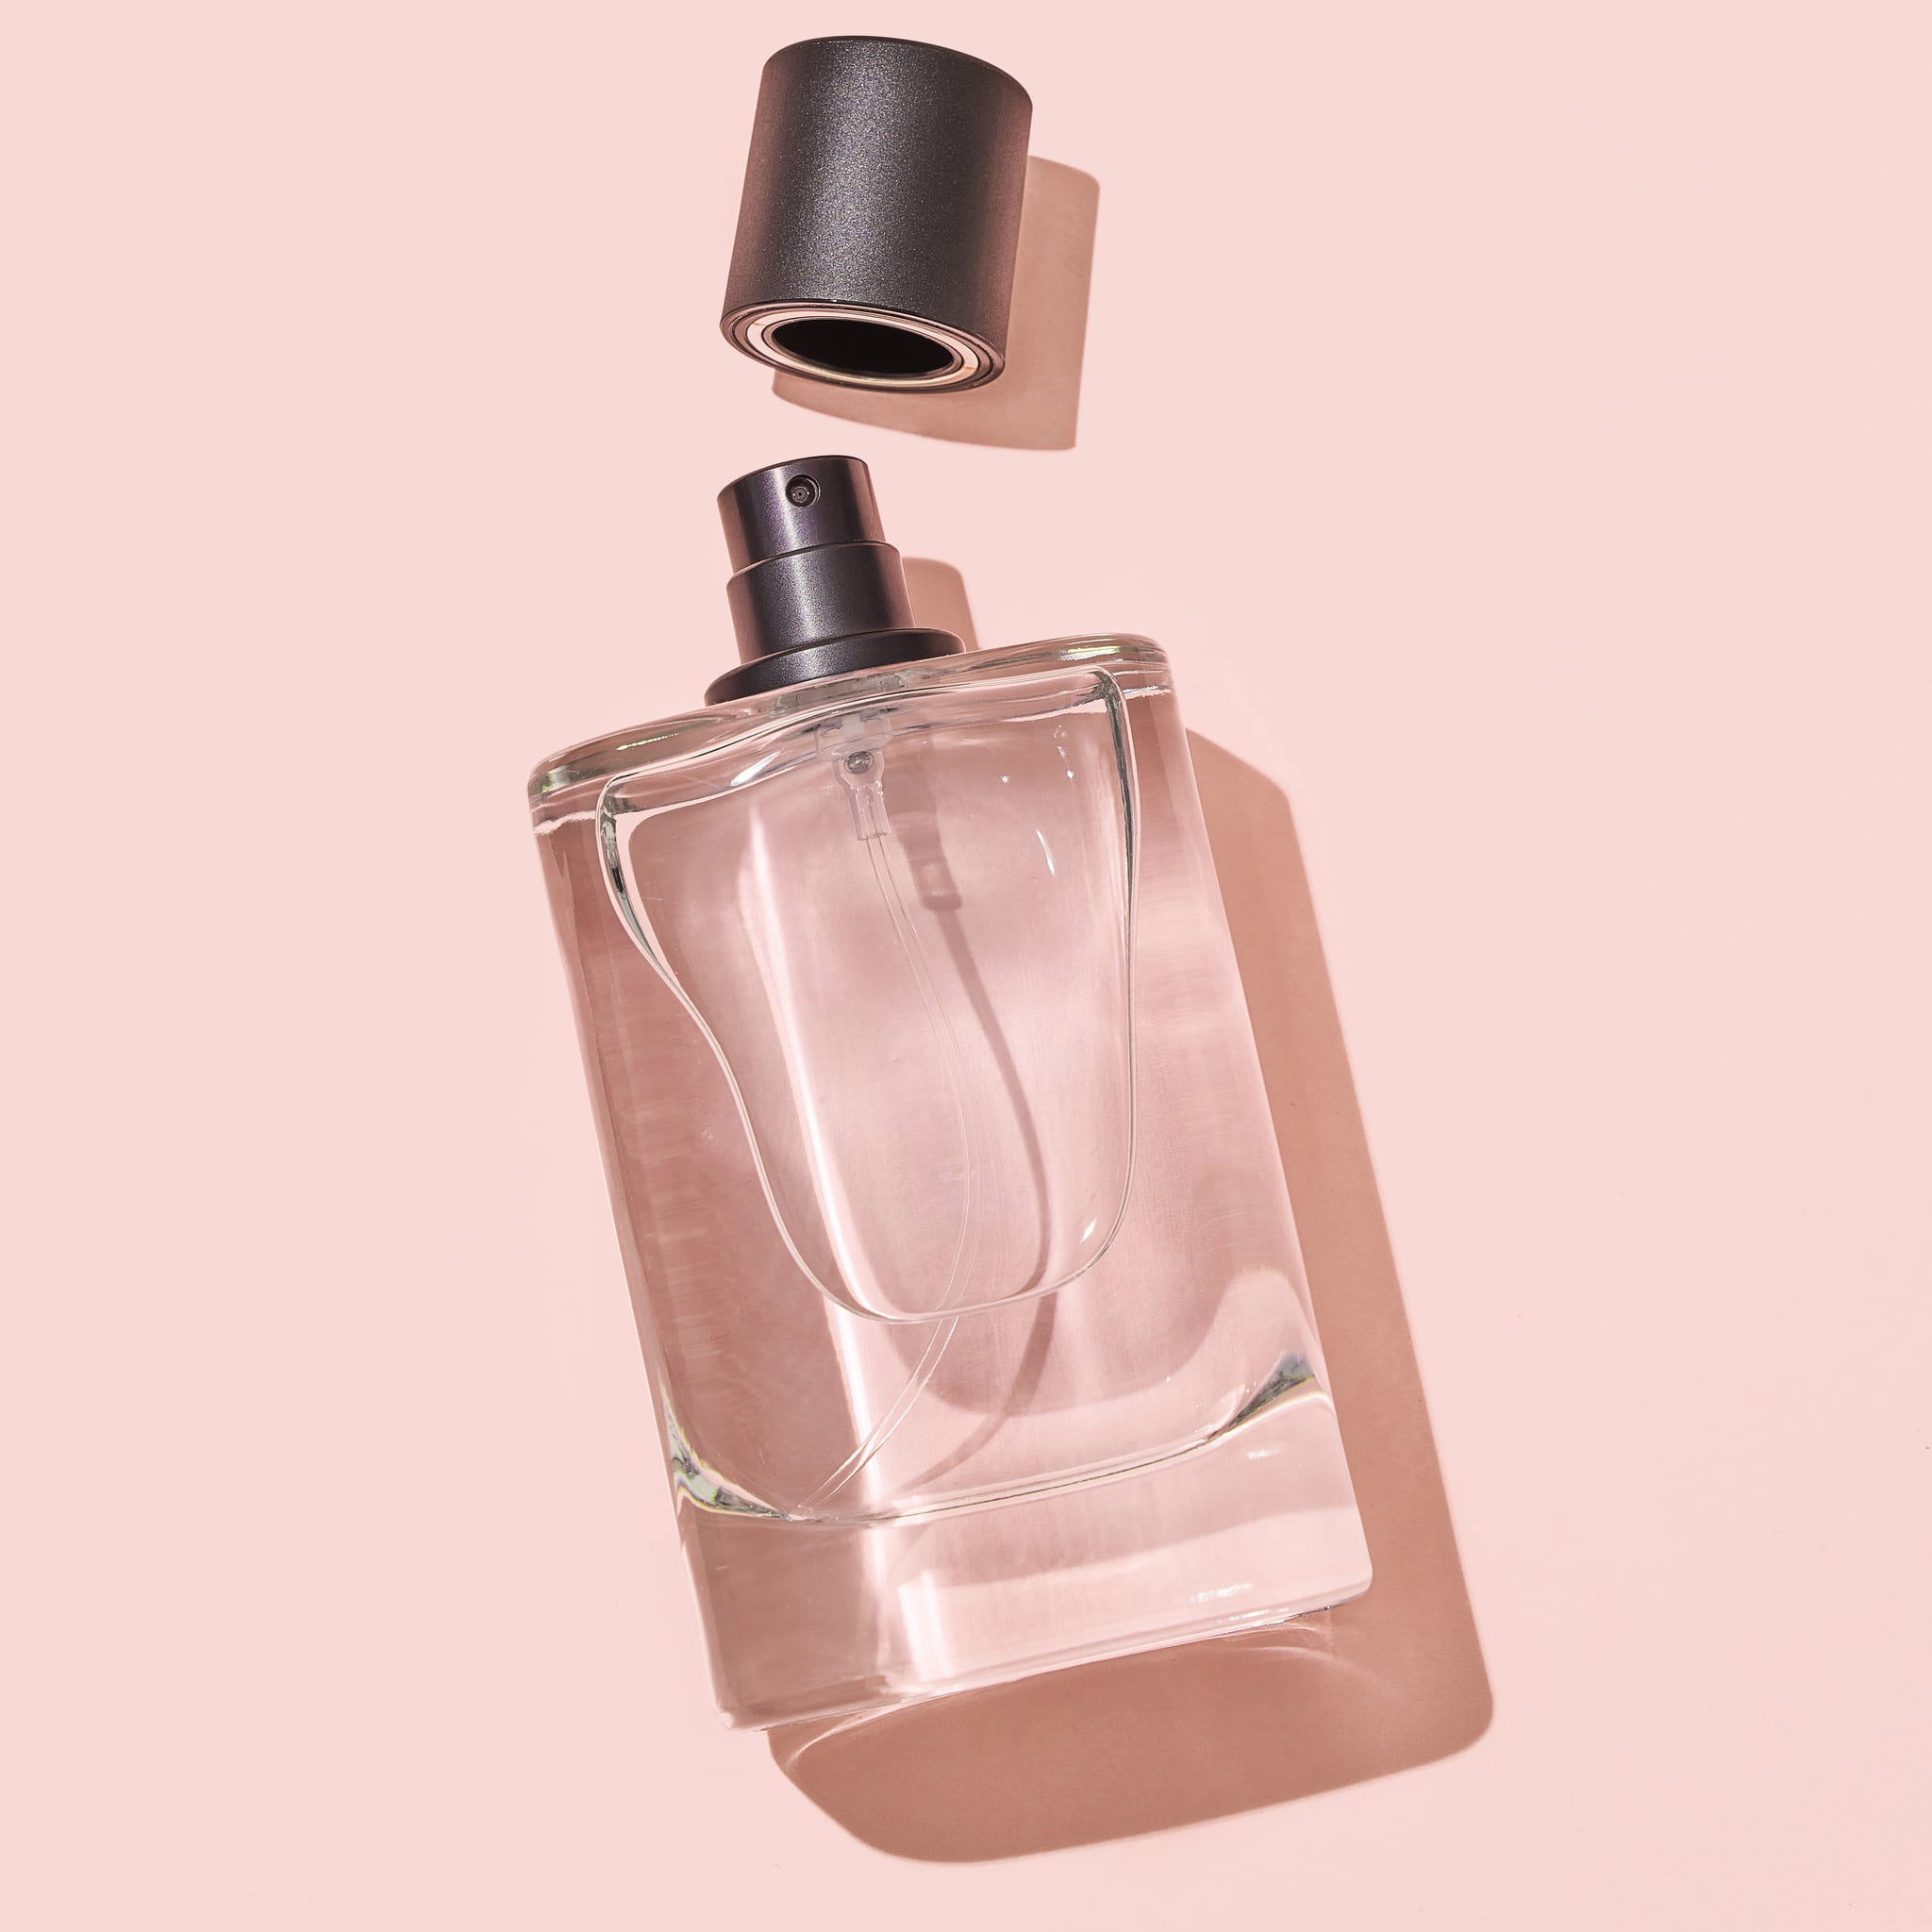 12 Woody Perfumes Worth Trying, According to Editors